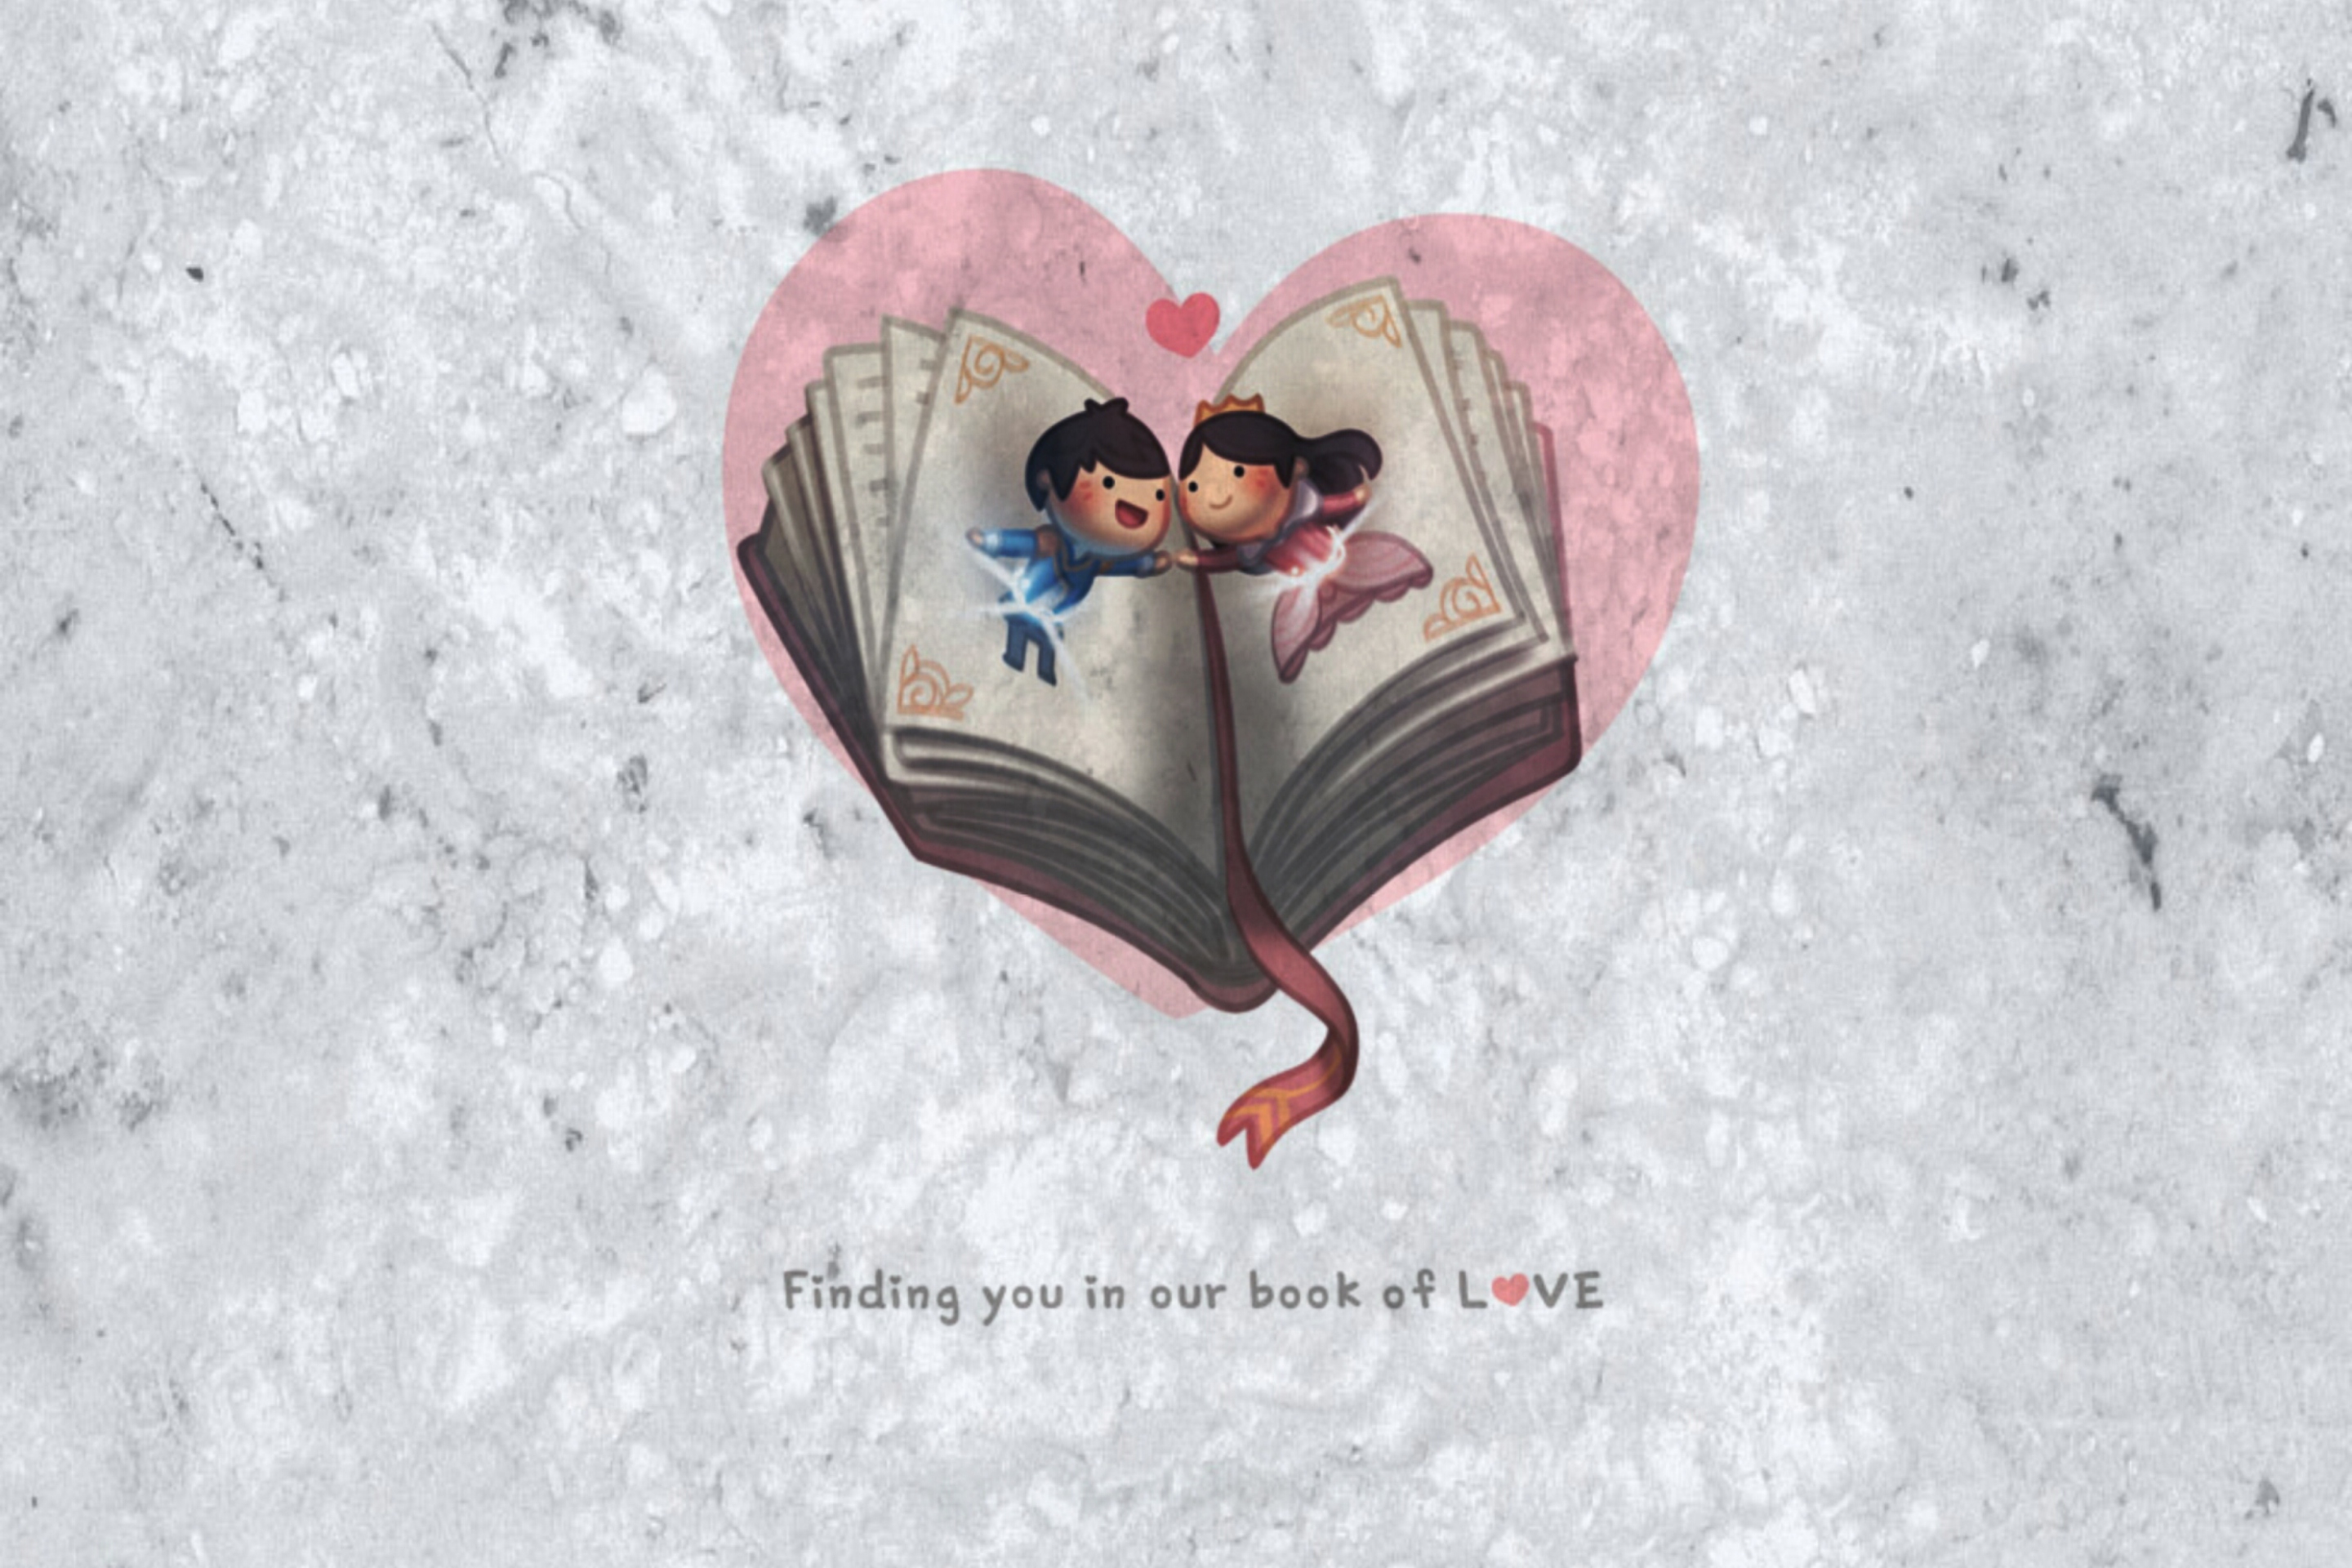 Love Is Finding You In Our Book Of Love screenshot #1 2880x1920